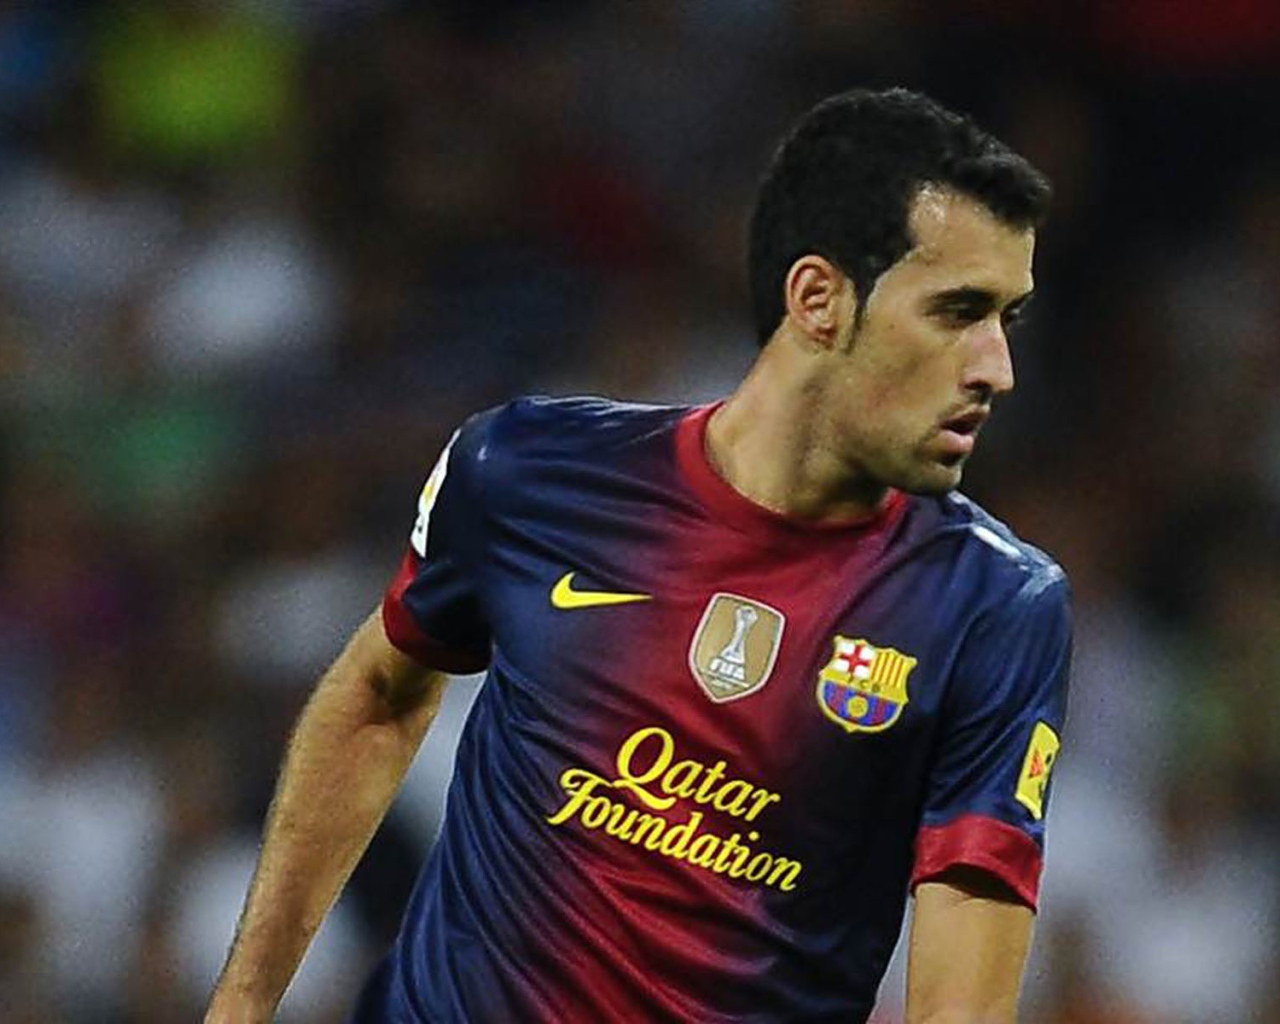 The best football player of Barcelona Sergio Busquets